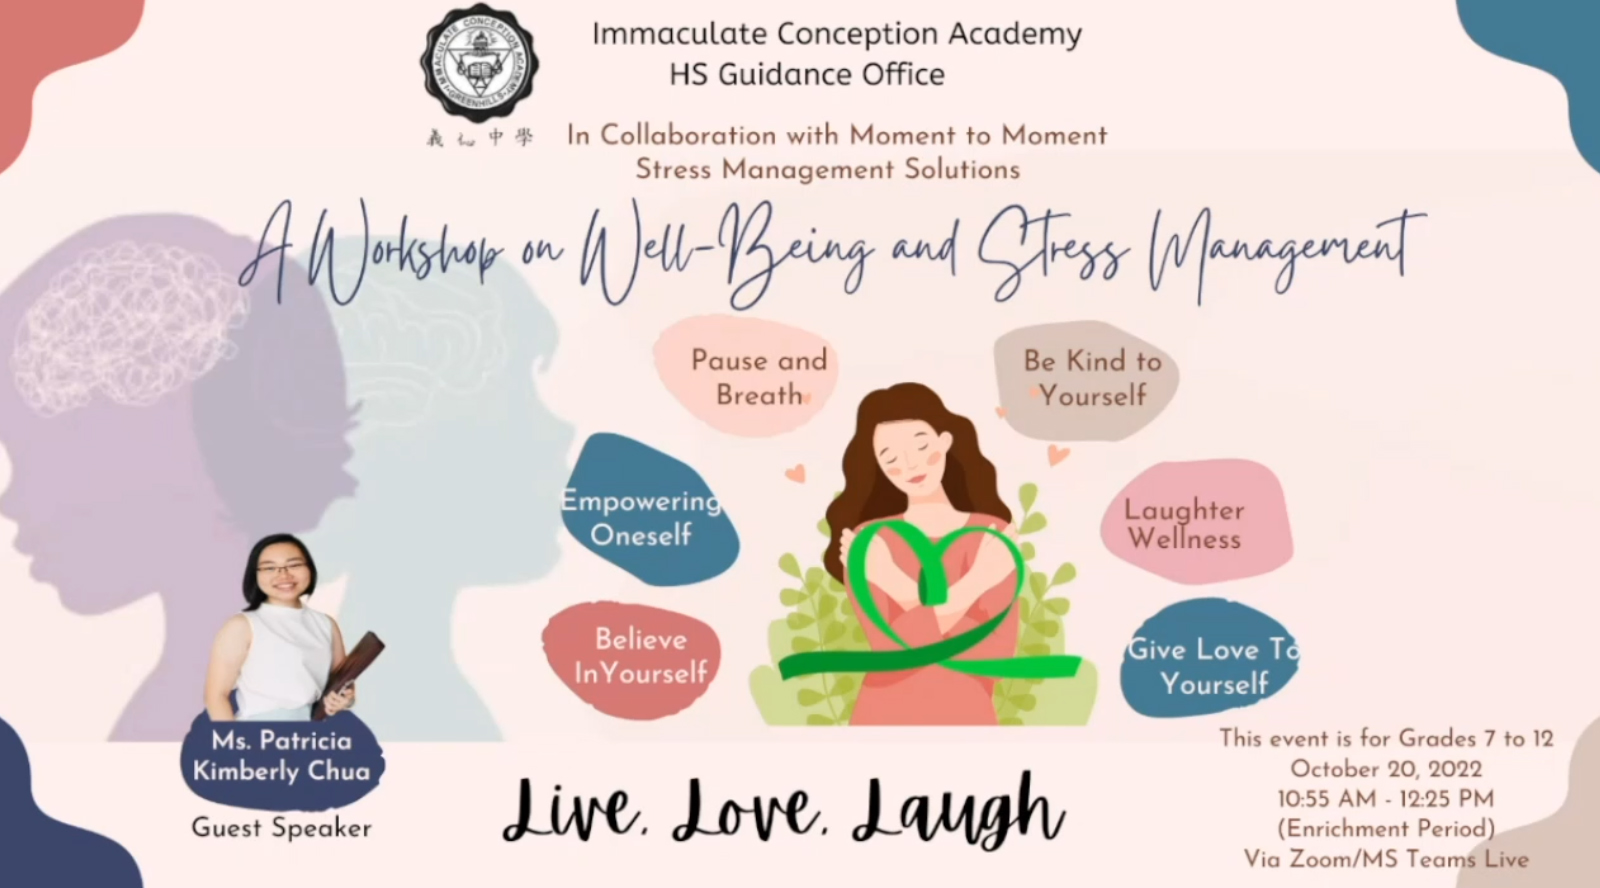 "Live, Love, Laugh" A Workshop on Well-Being and Stress Management